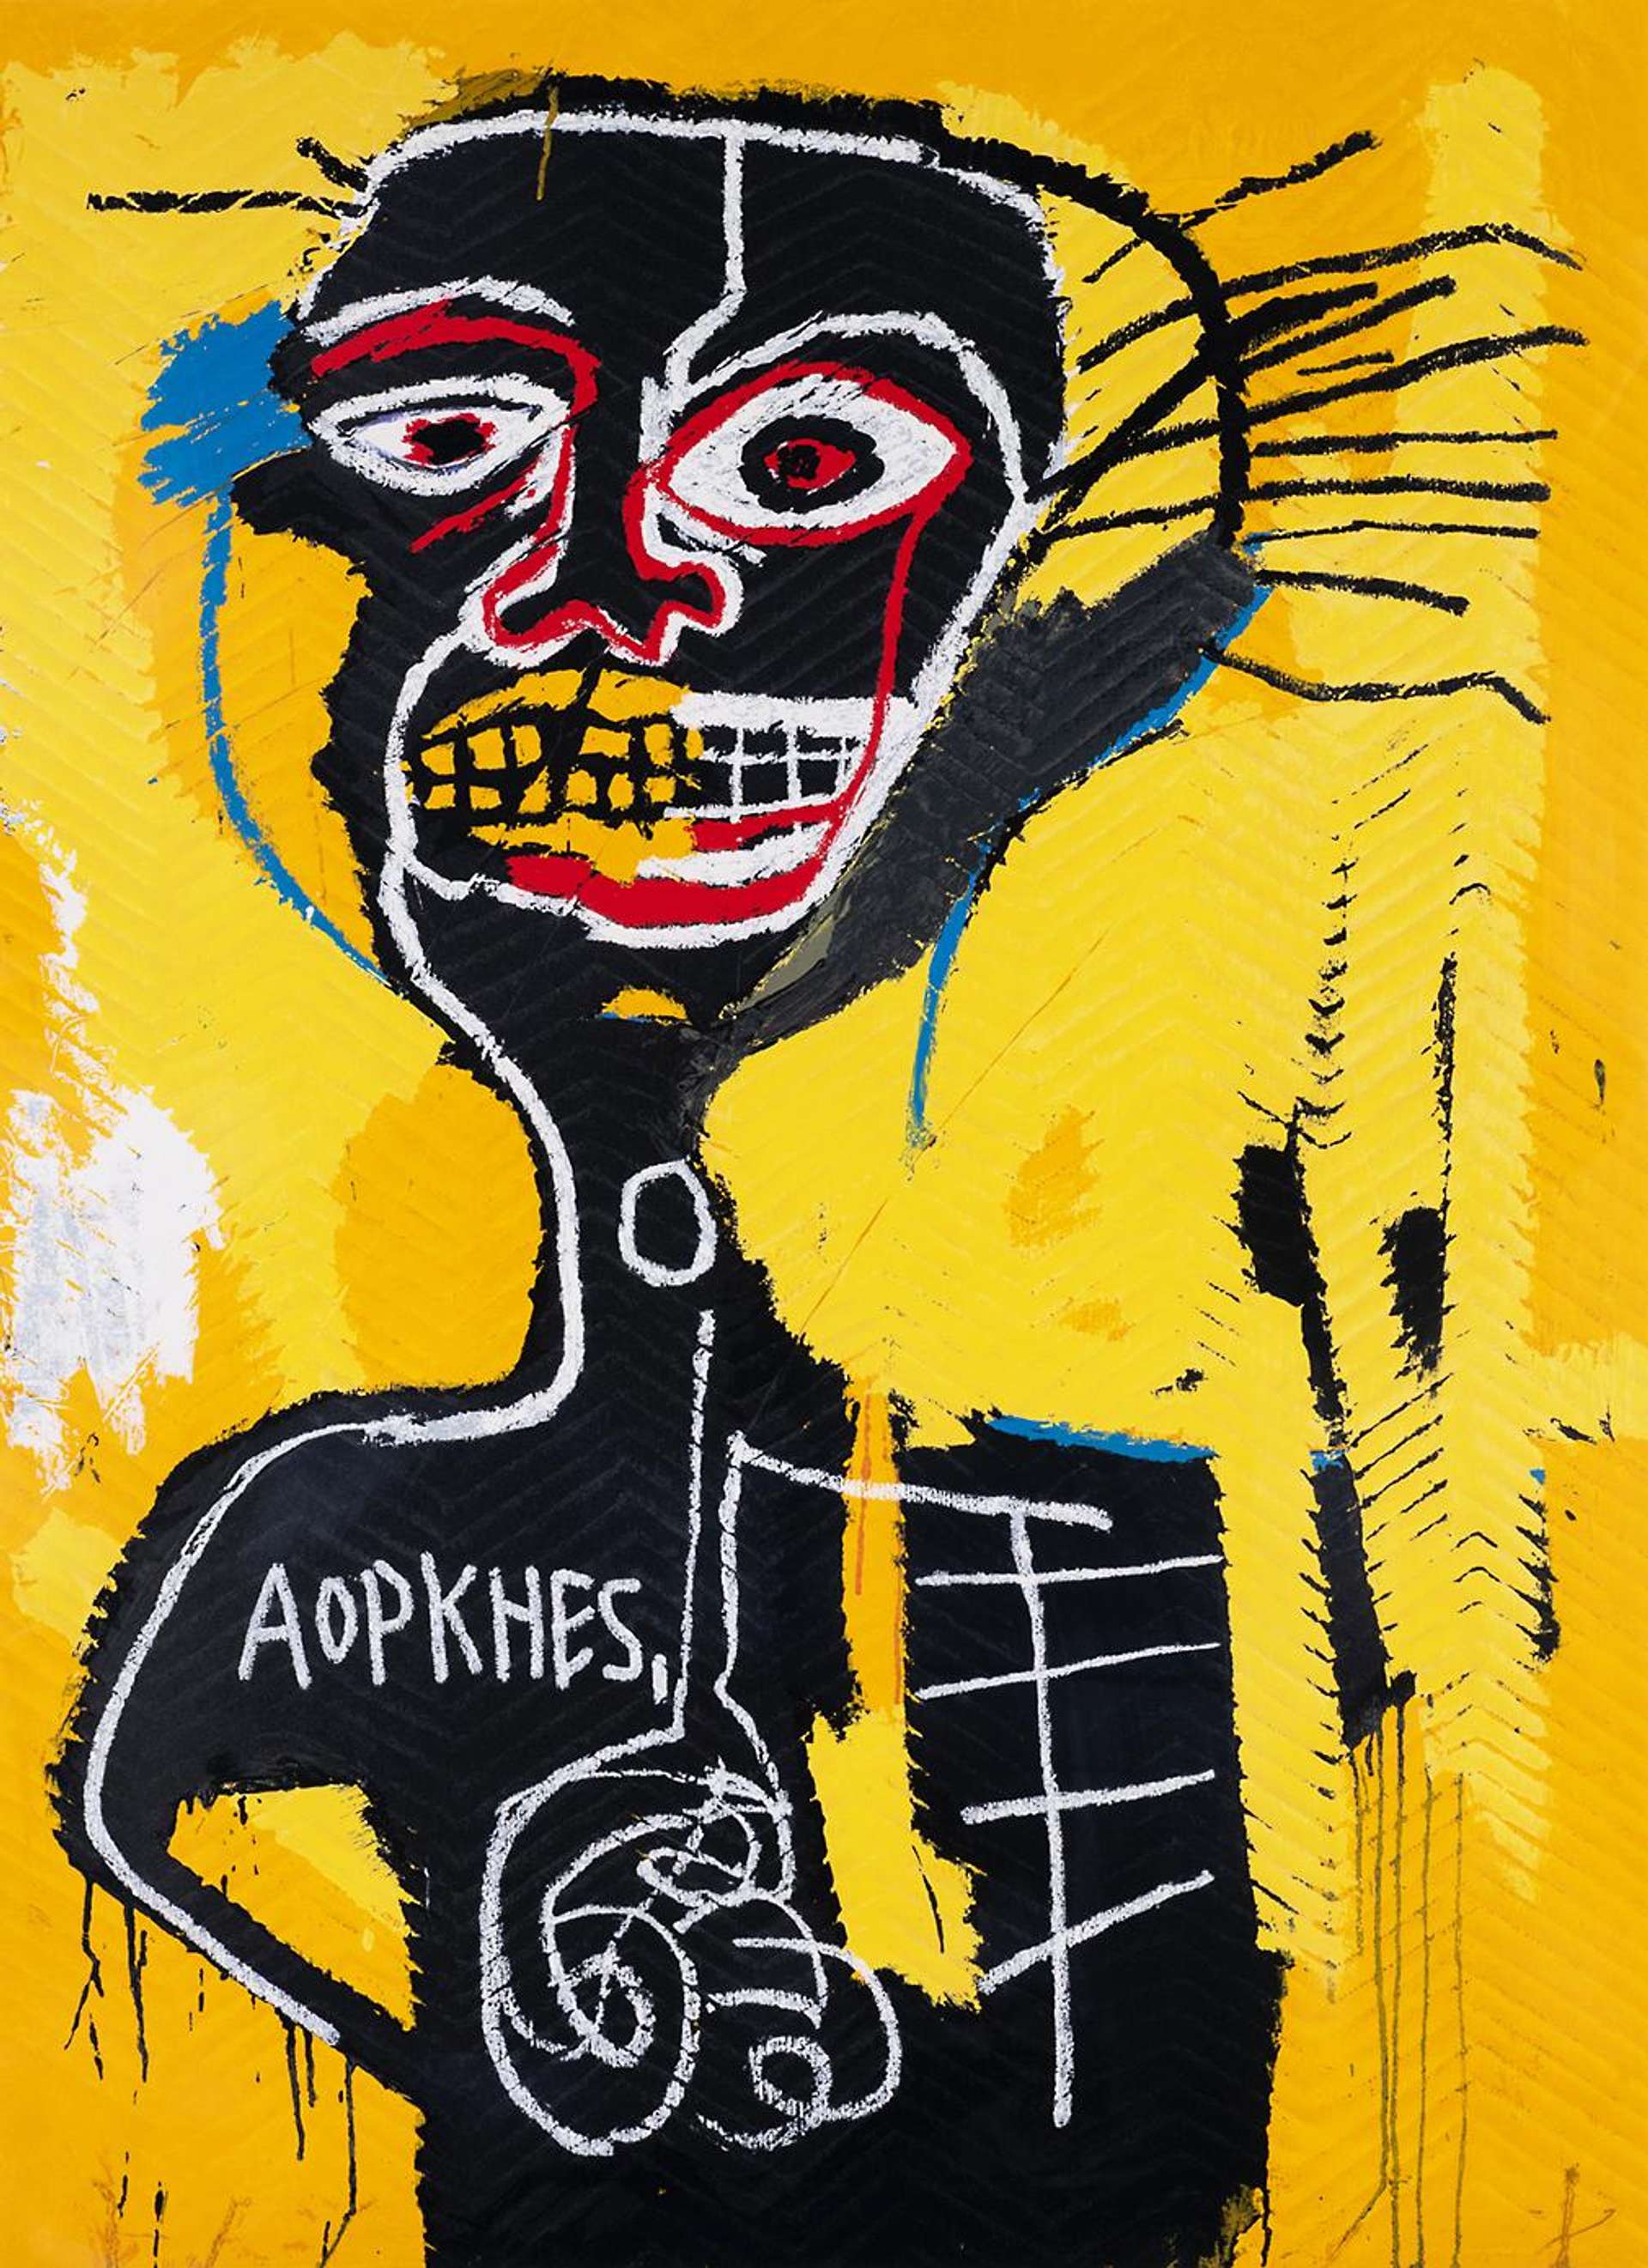 An abstract figure with text and graphic lines against a yellow background.